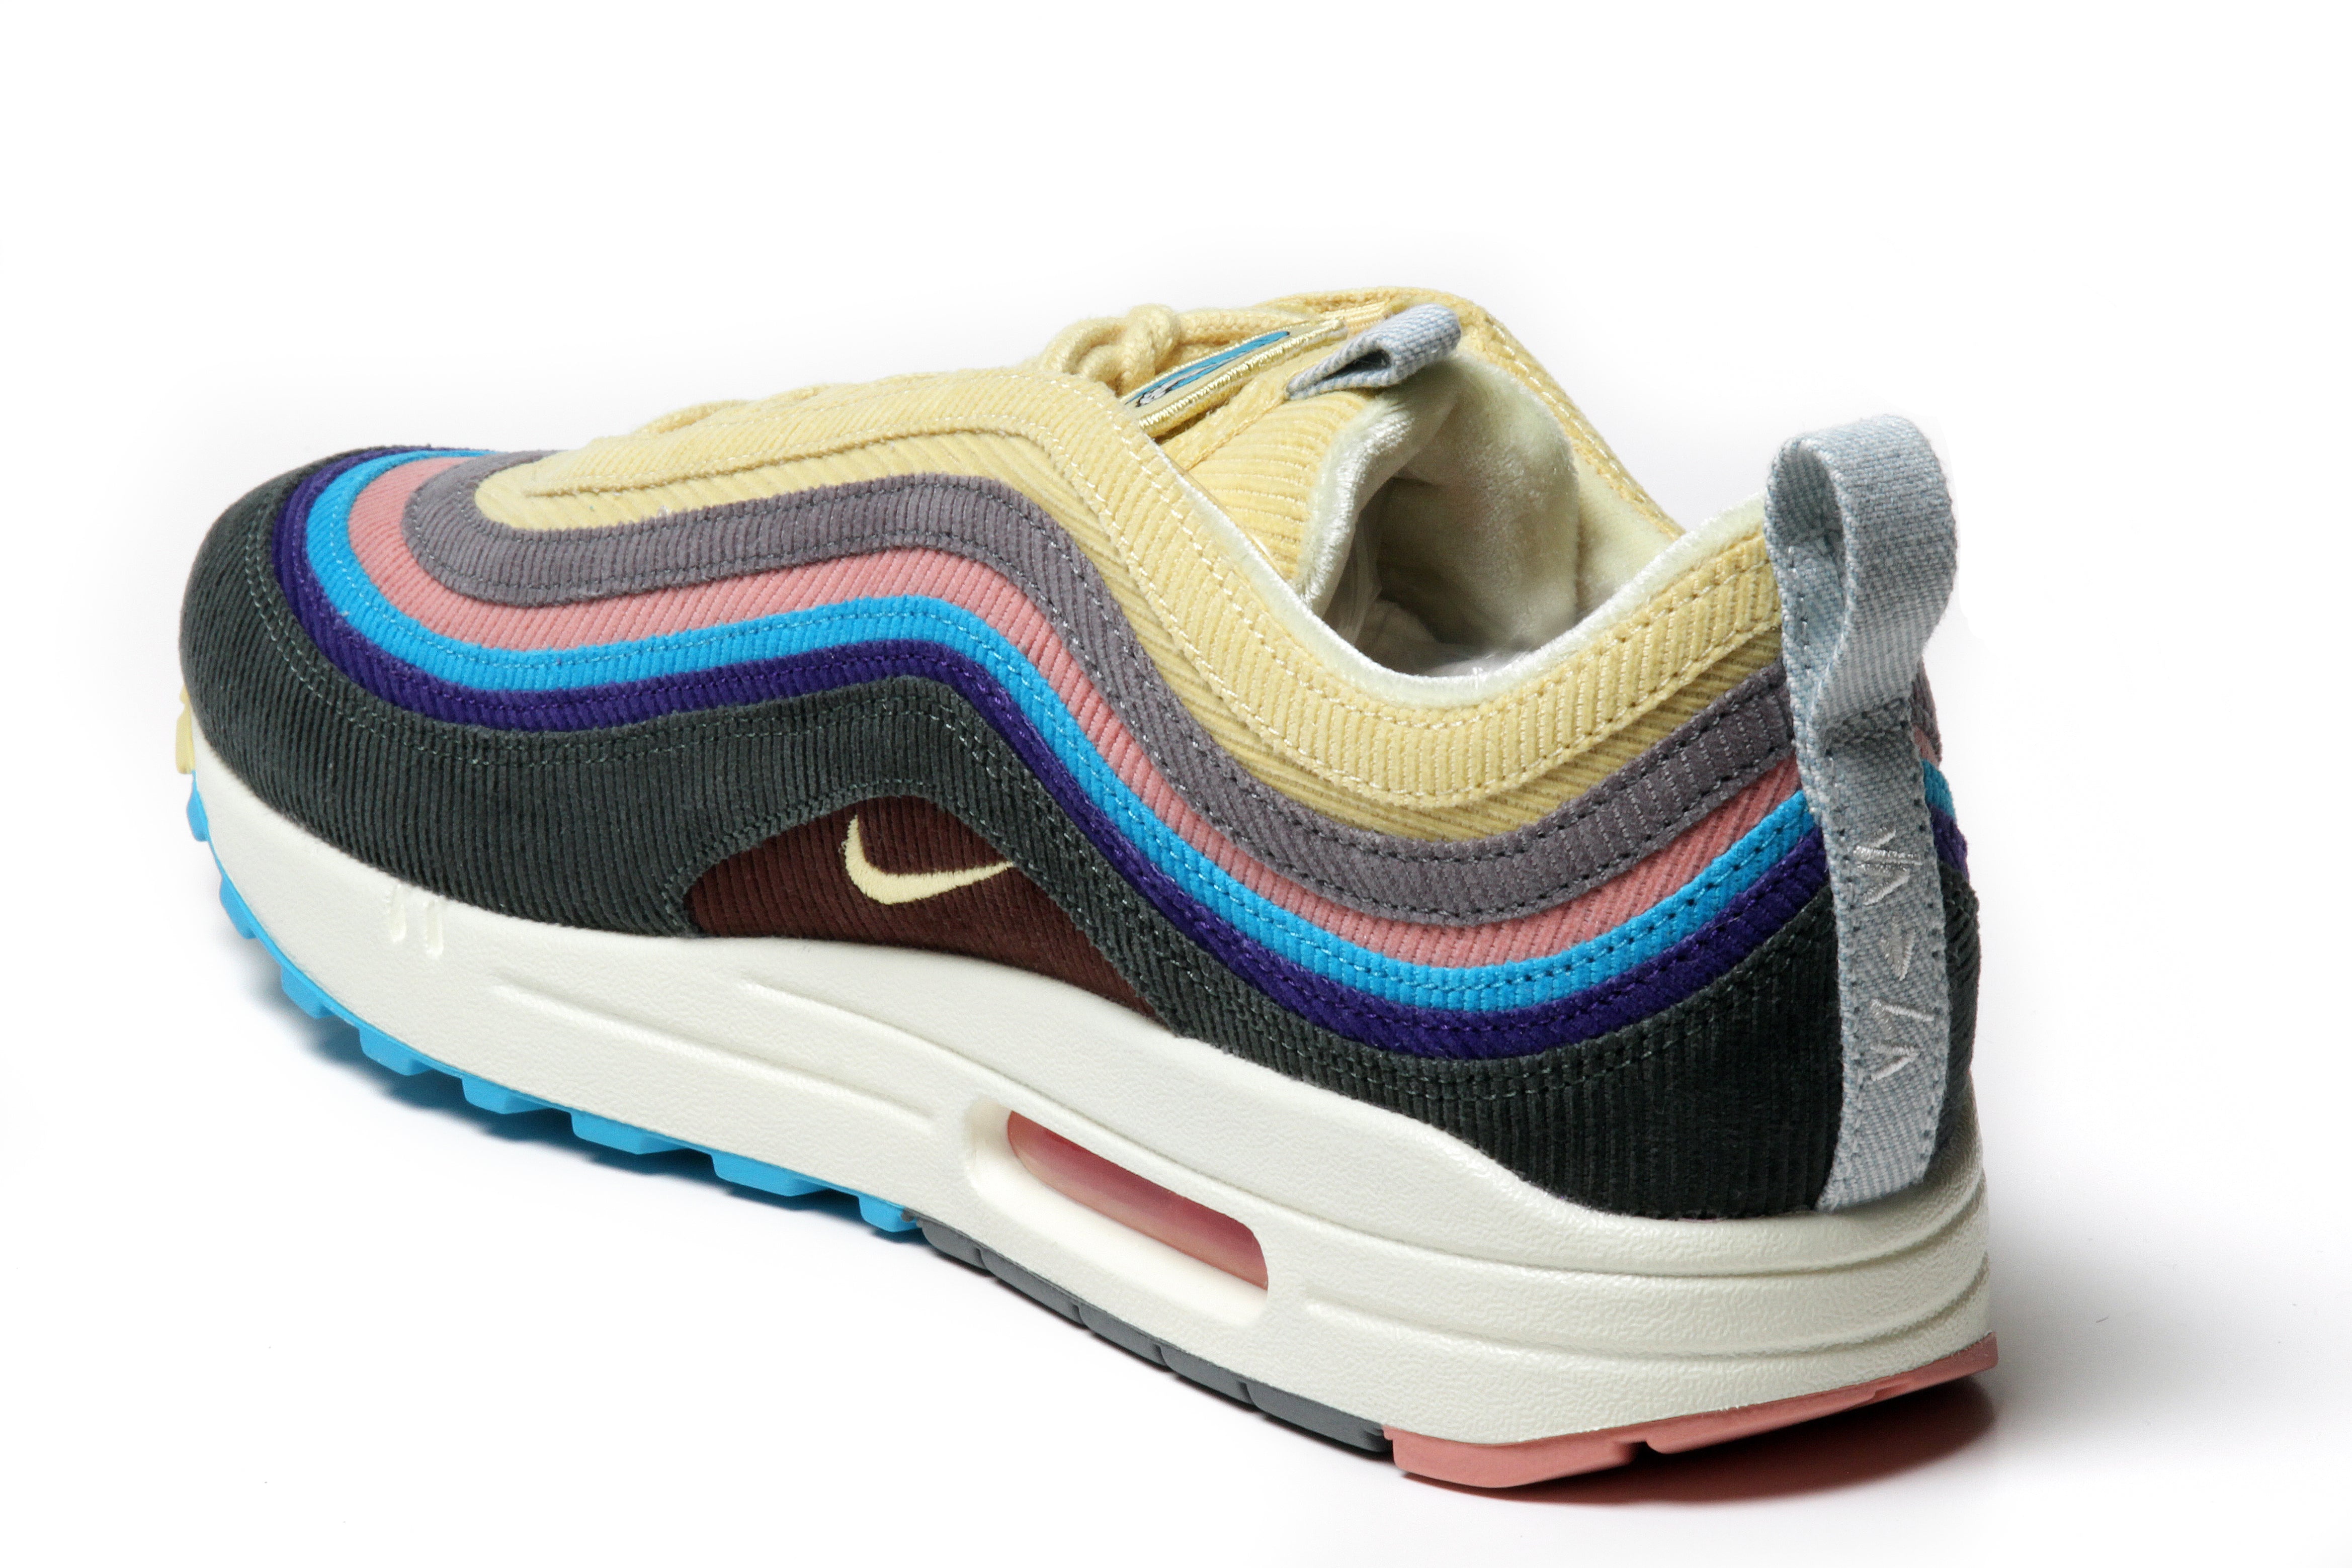 Inconsistente Equivalente personalidad Limited edition sneakers release | Air Max 1/97 by Sean Wotherspoon – AKENZ